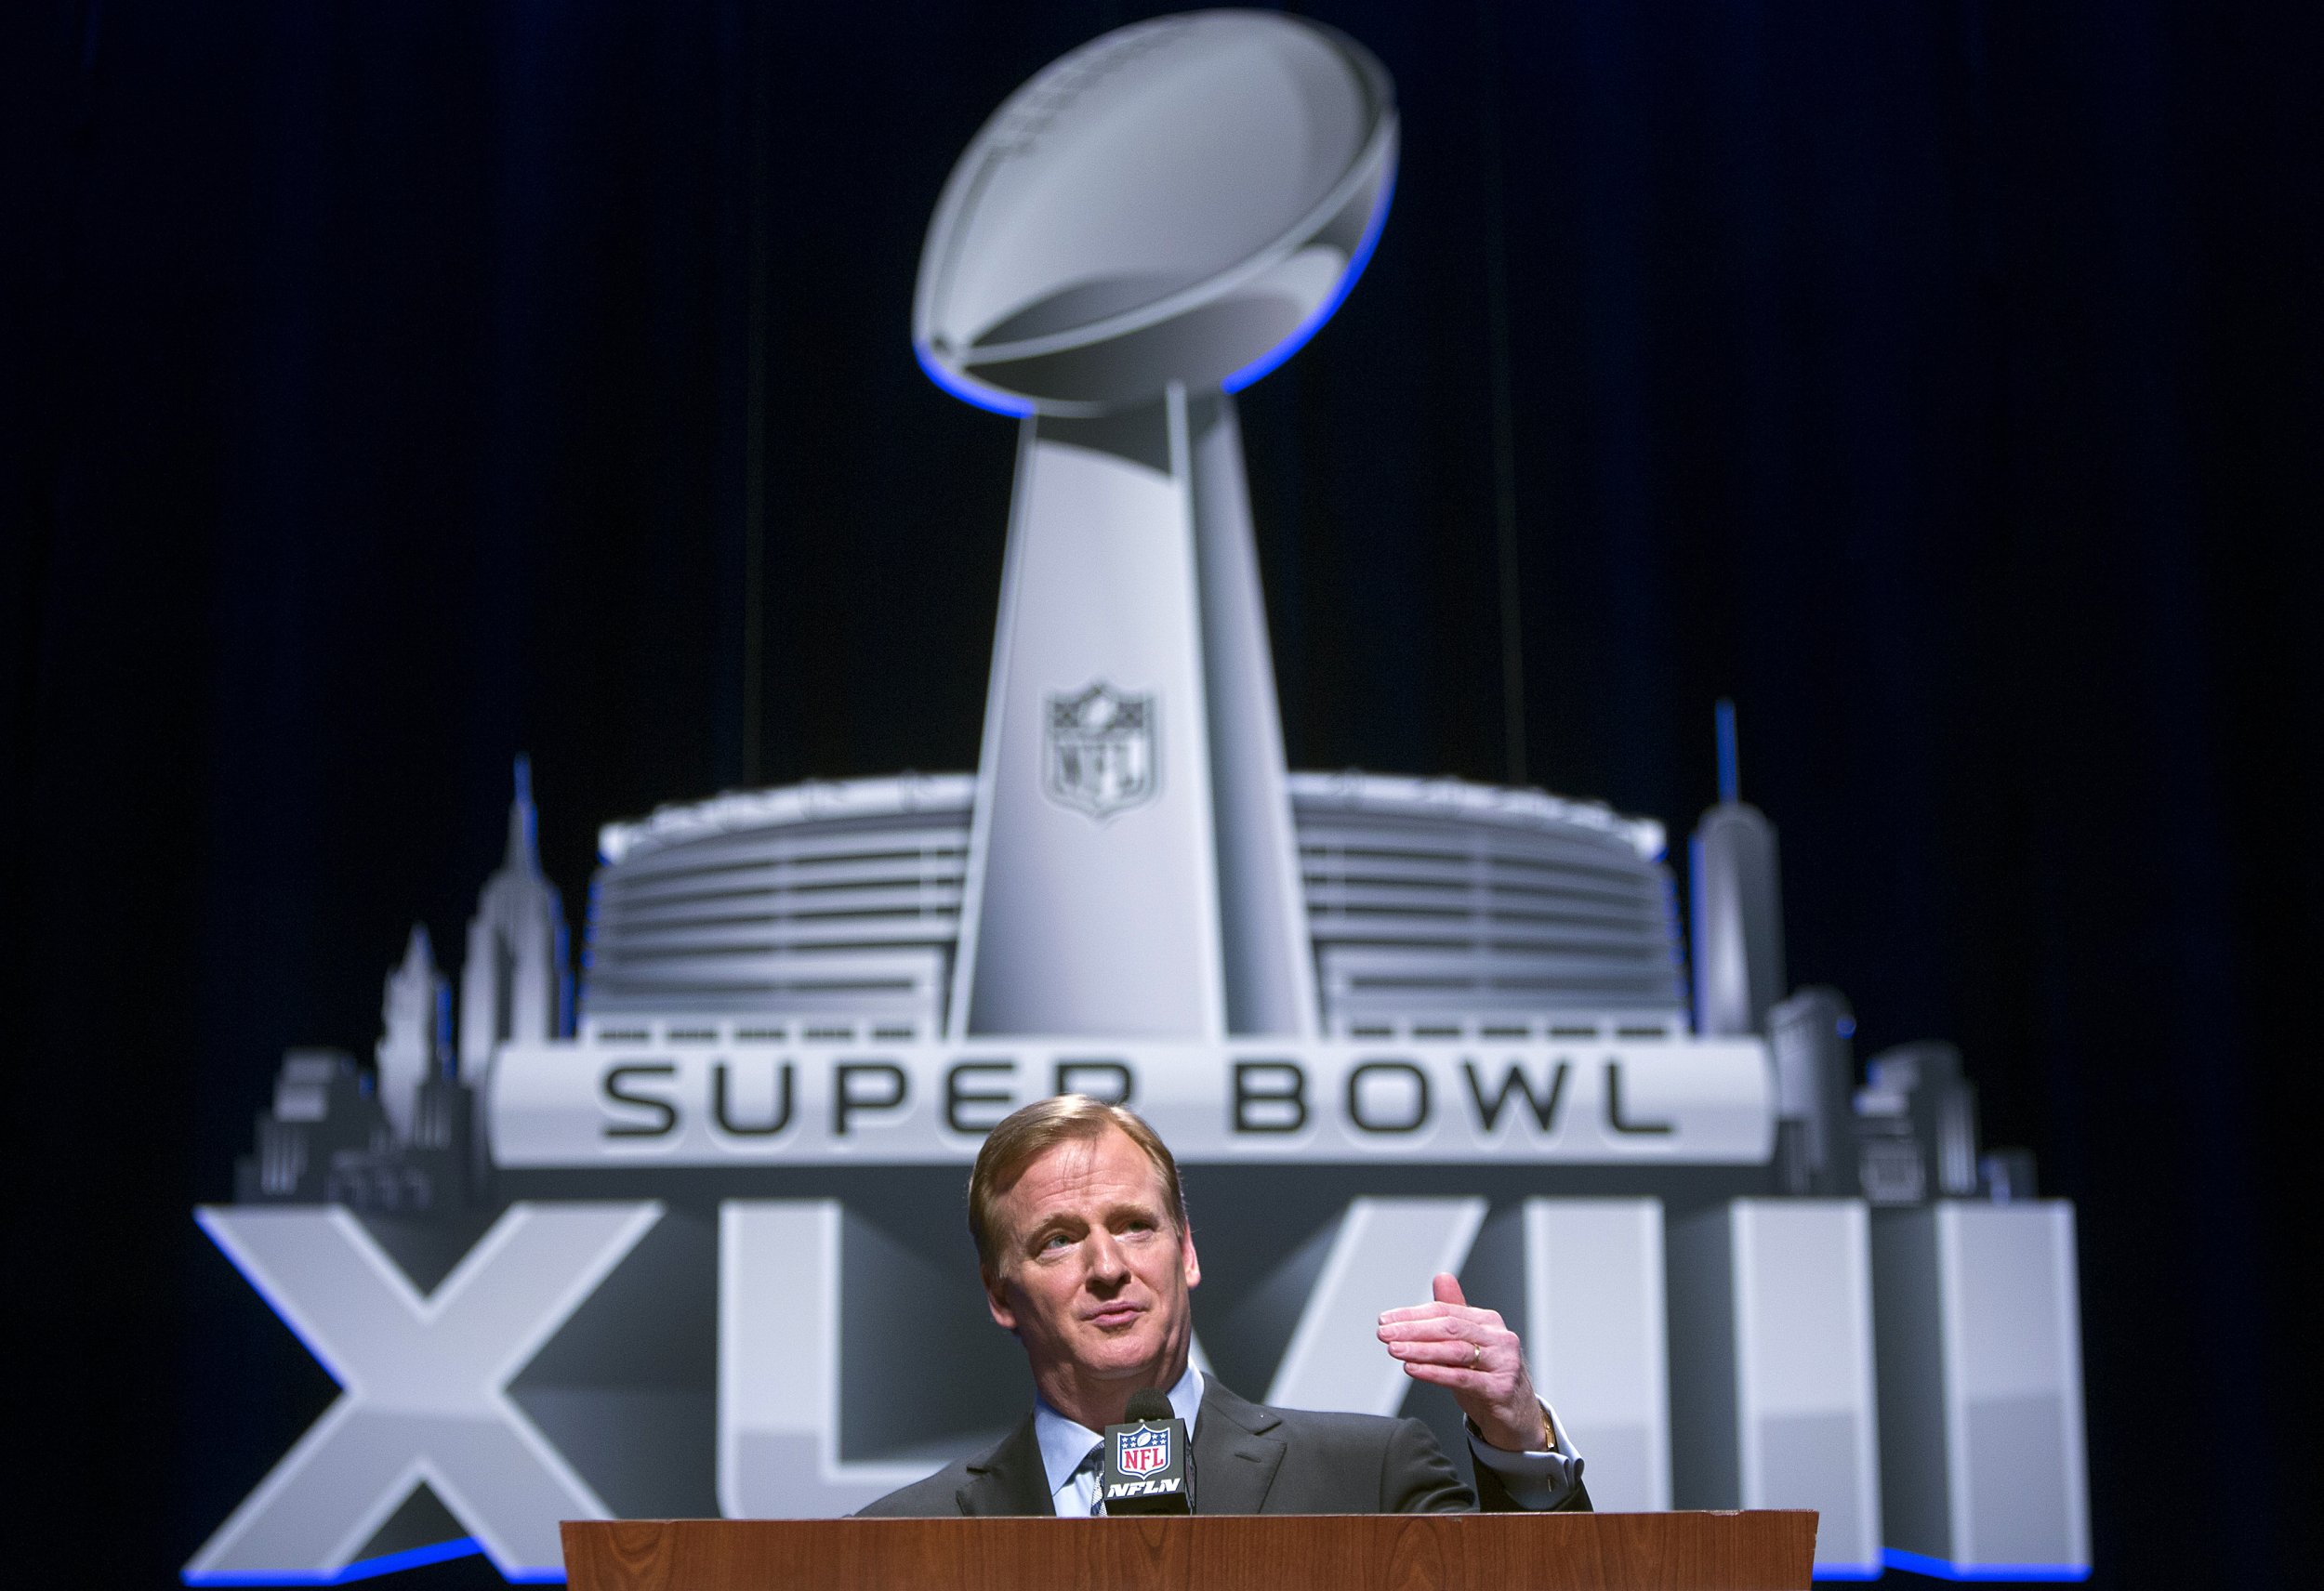 Super Bowl Quotes 19 Memorable Sayings To Share Before The 2014